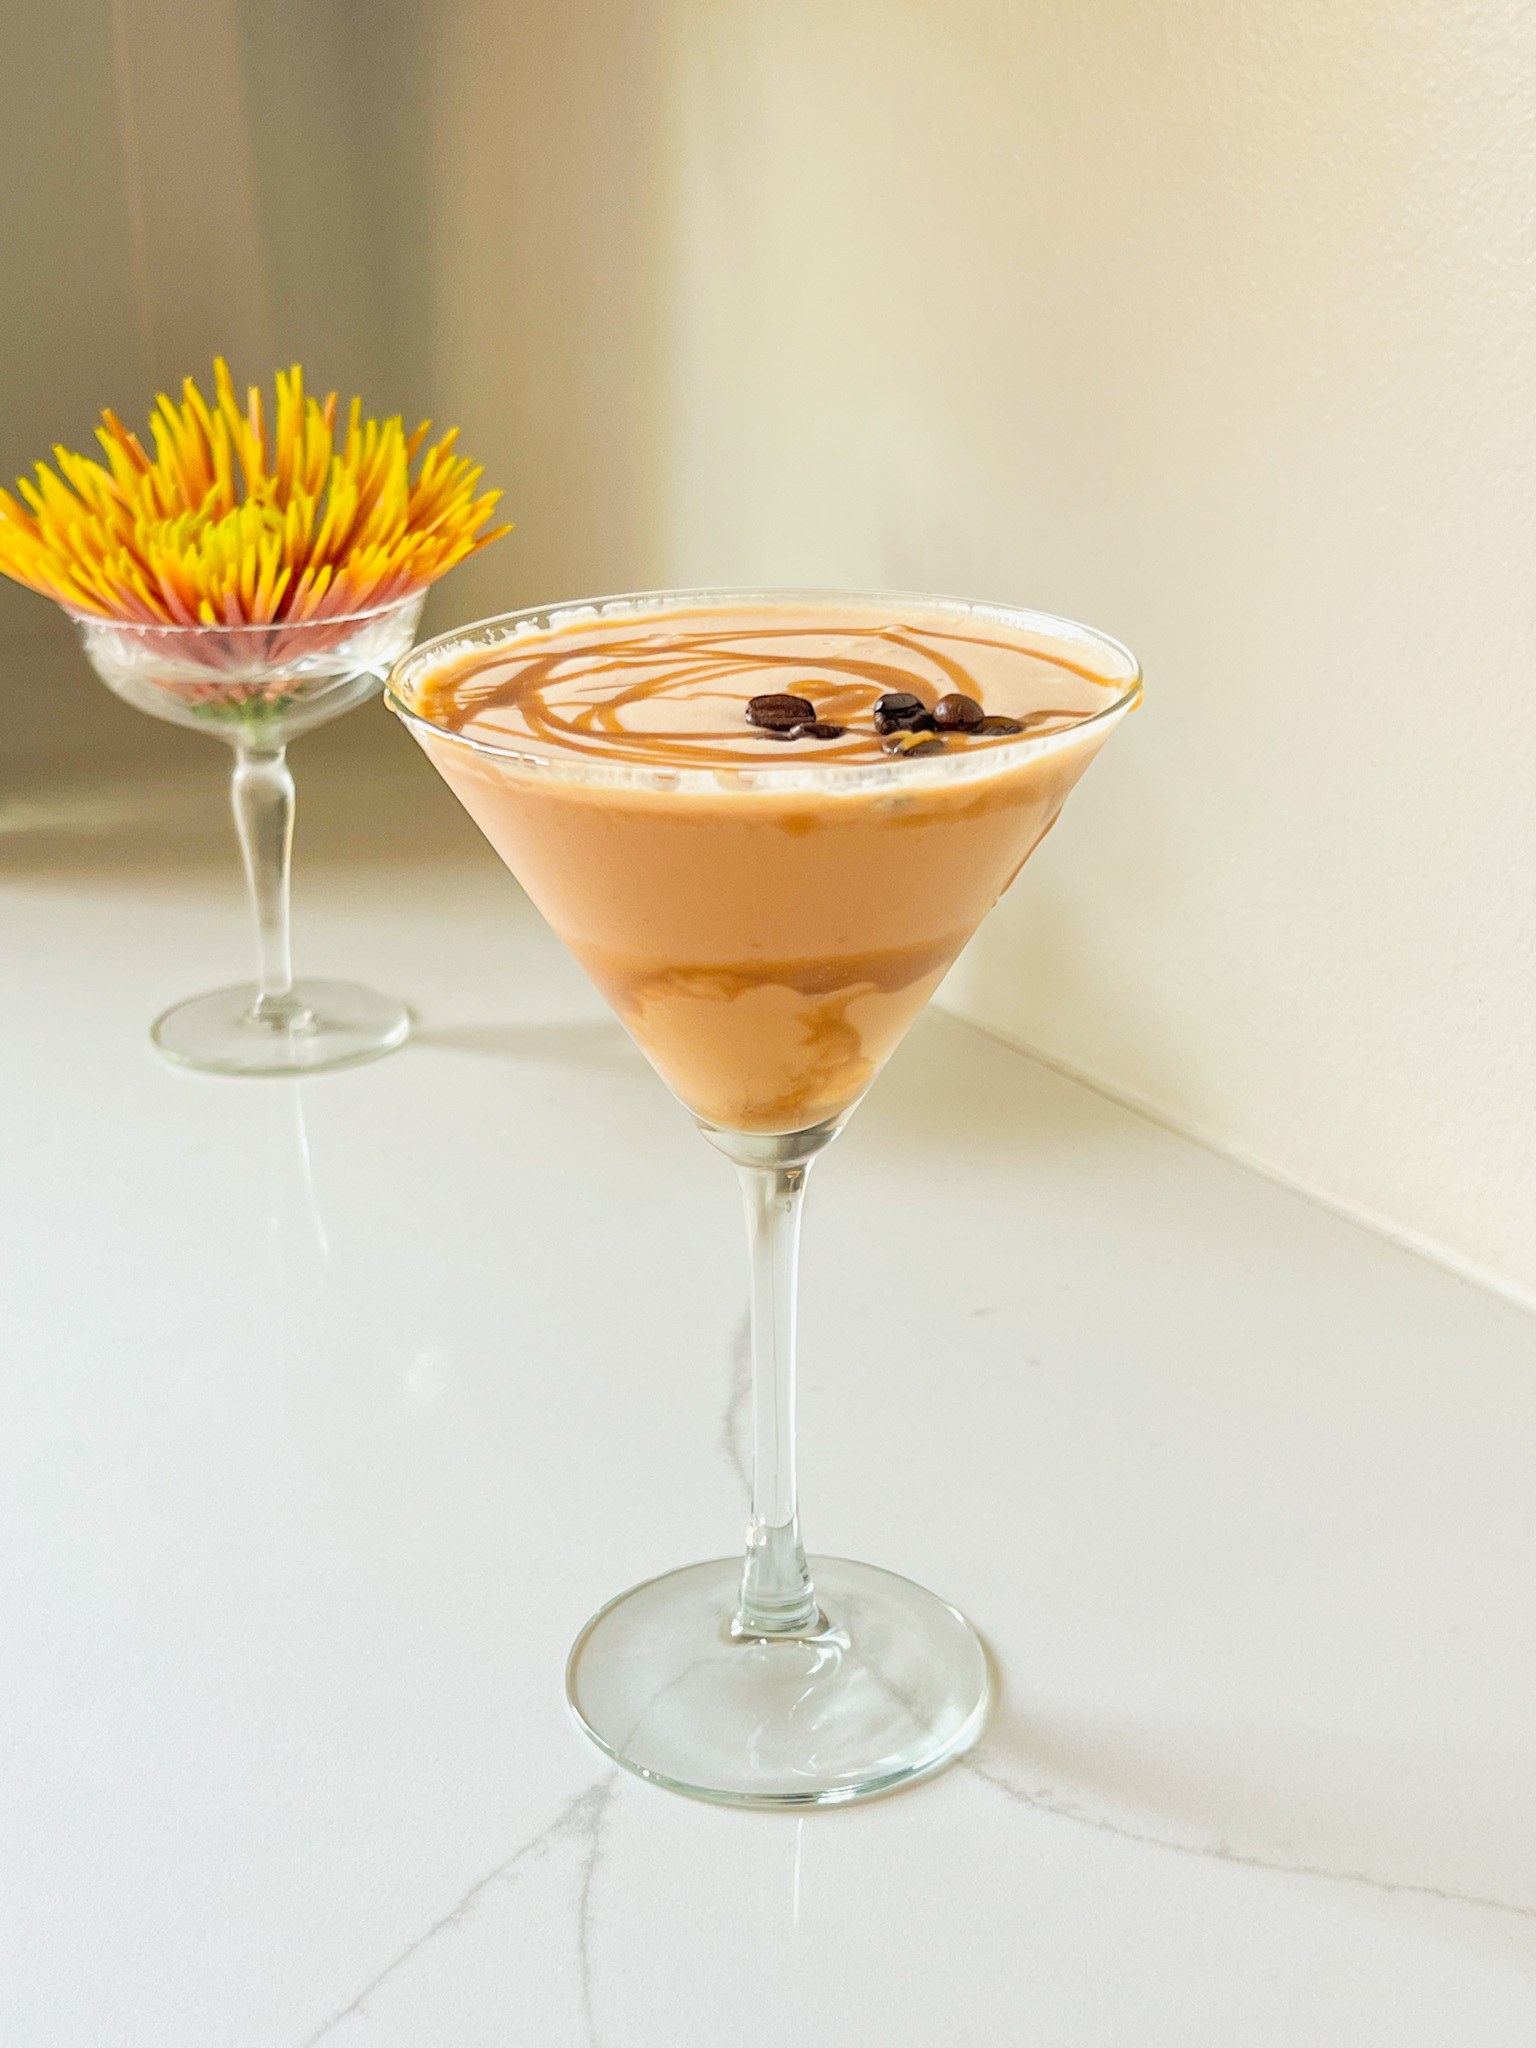 Salted Caramel Fireball Espresso Martini in a glass with a yellow and orange mum flower in a martini glass